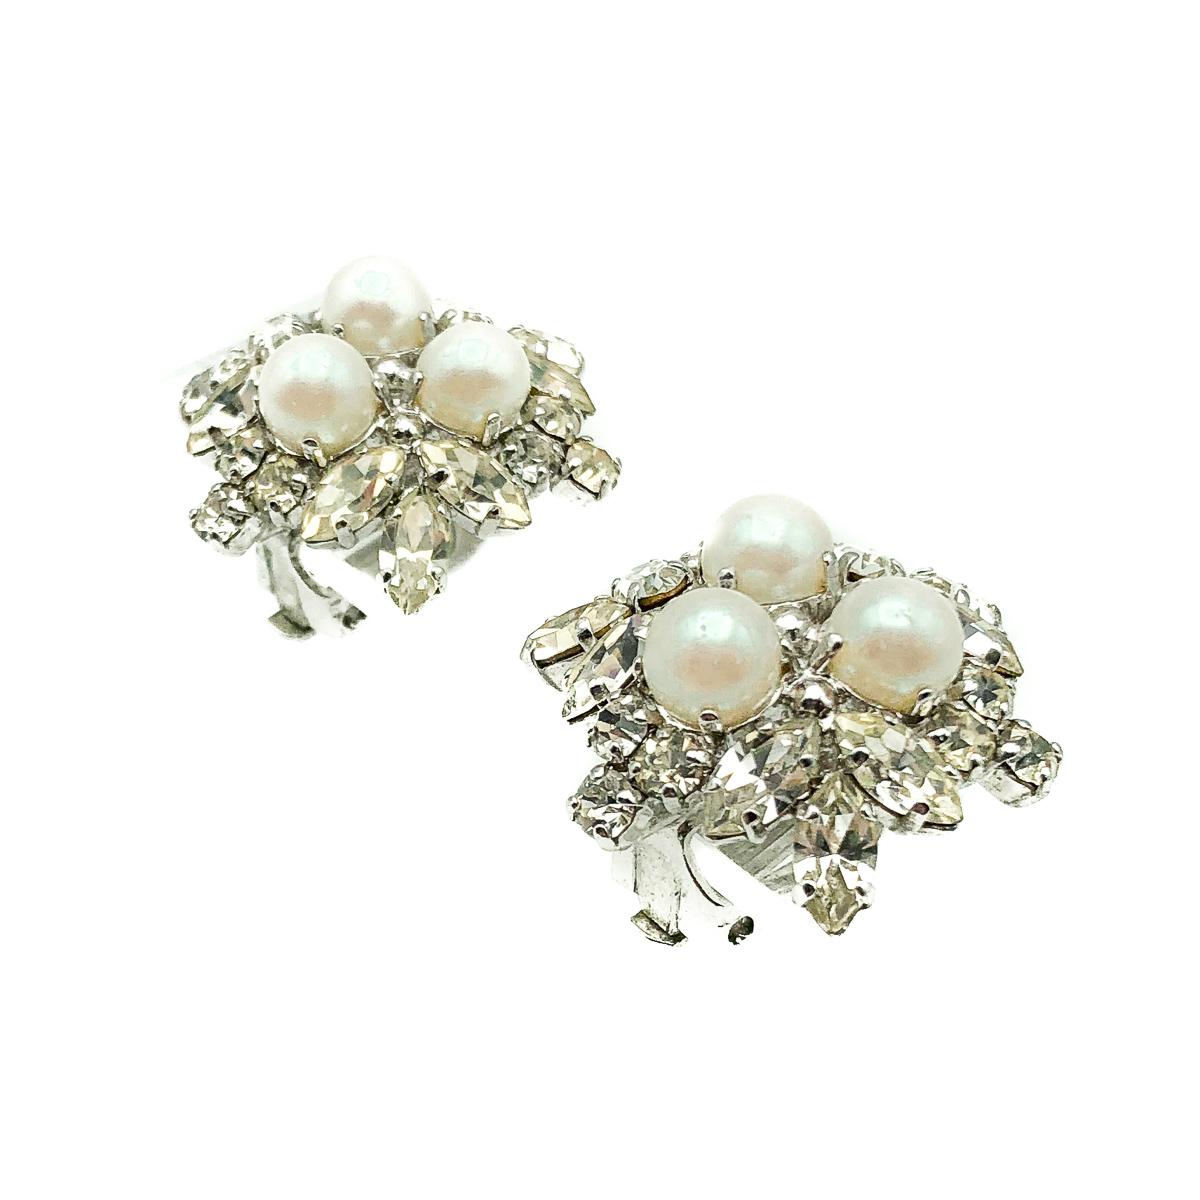 Seriously beautiful Vintage Dior Pearl Star Earrings from the House of Dior during the tenure of Marc Bohan in 1966 . Featuring a glorious arrage of fancy cut crystal stones surround a trio of simulated whole pearls in rhodium plated metal. All